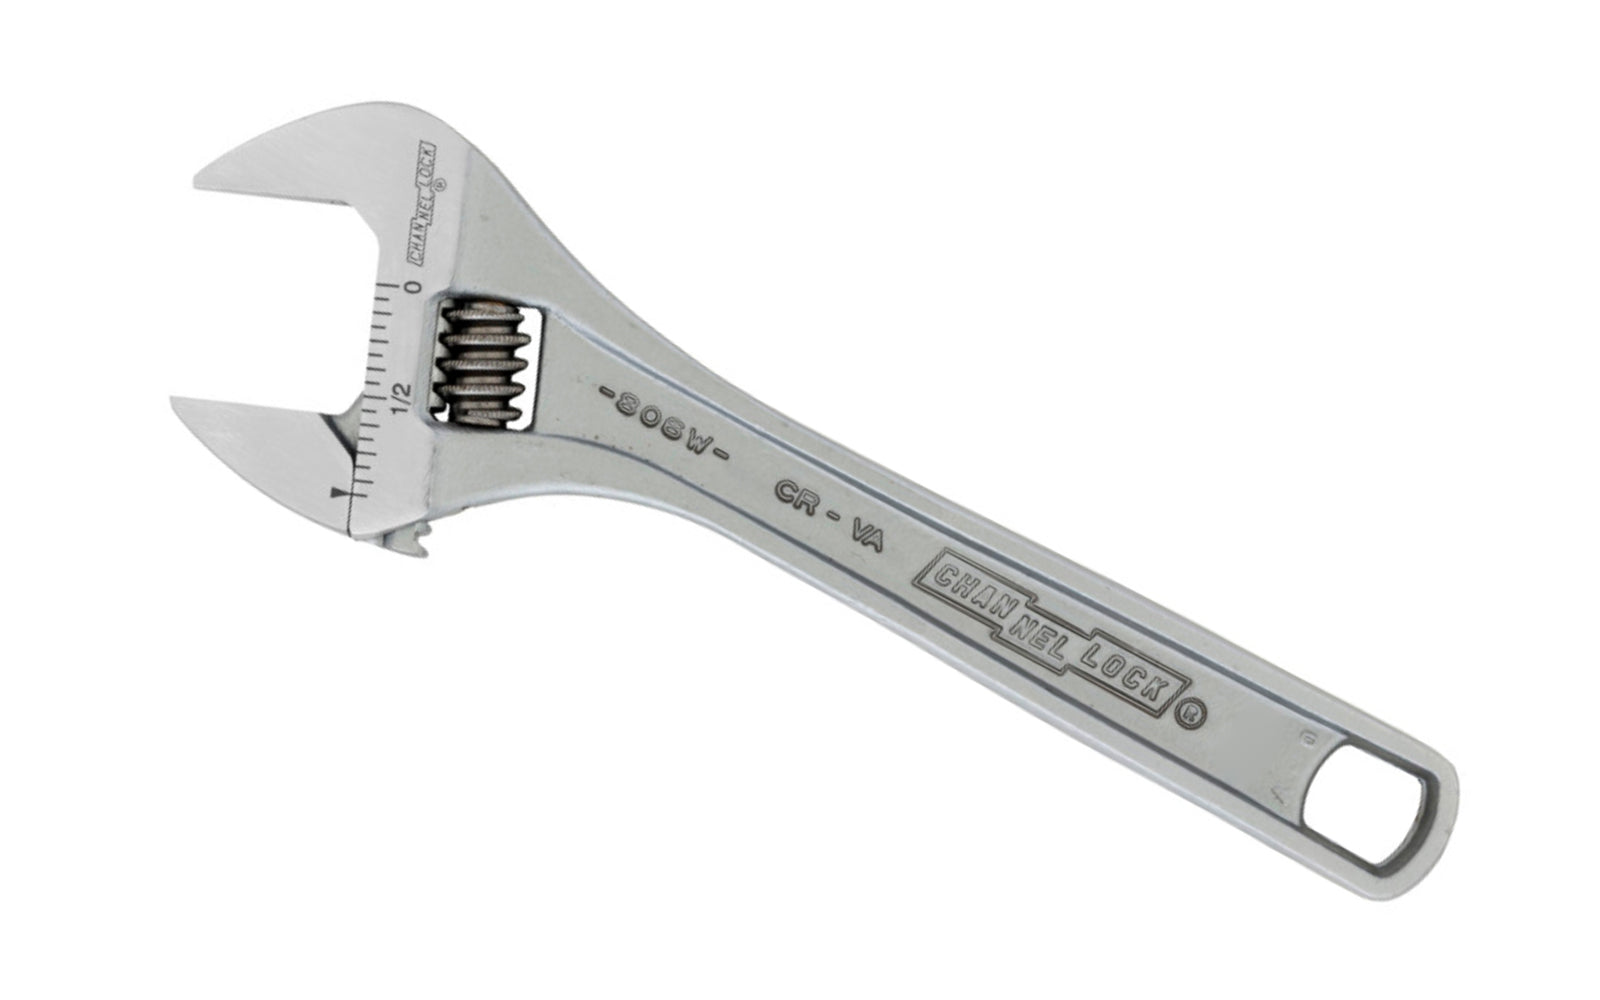 Channellock 6" Adjustable Wrench. Wide jaws offer extra capacity, supporting larger nuts & bolts. Measurement scales are laser engraved (in. on front, mm. on reverse) & are handy for sizing nuts, pipe & tube diameters. Rugged Chrome Vanadium steel. Chrome finish for rust prevention. 6.25" size. Channelock Model 806W.